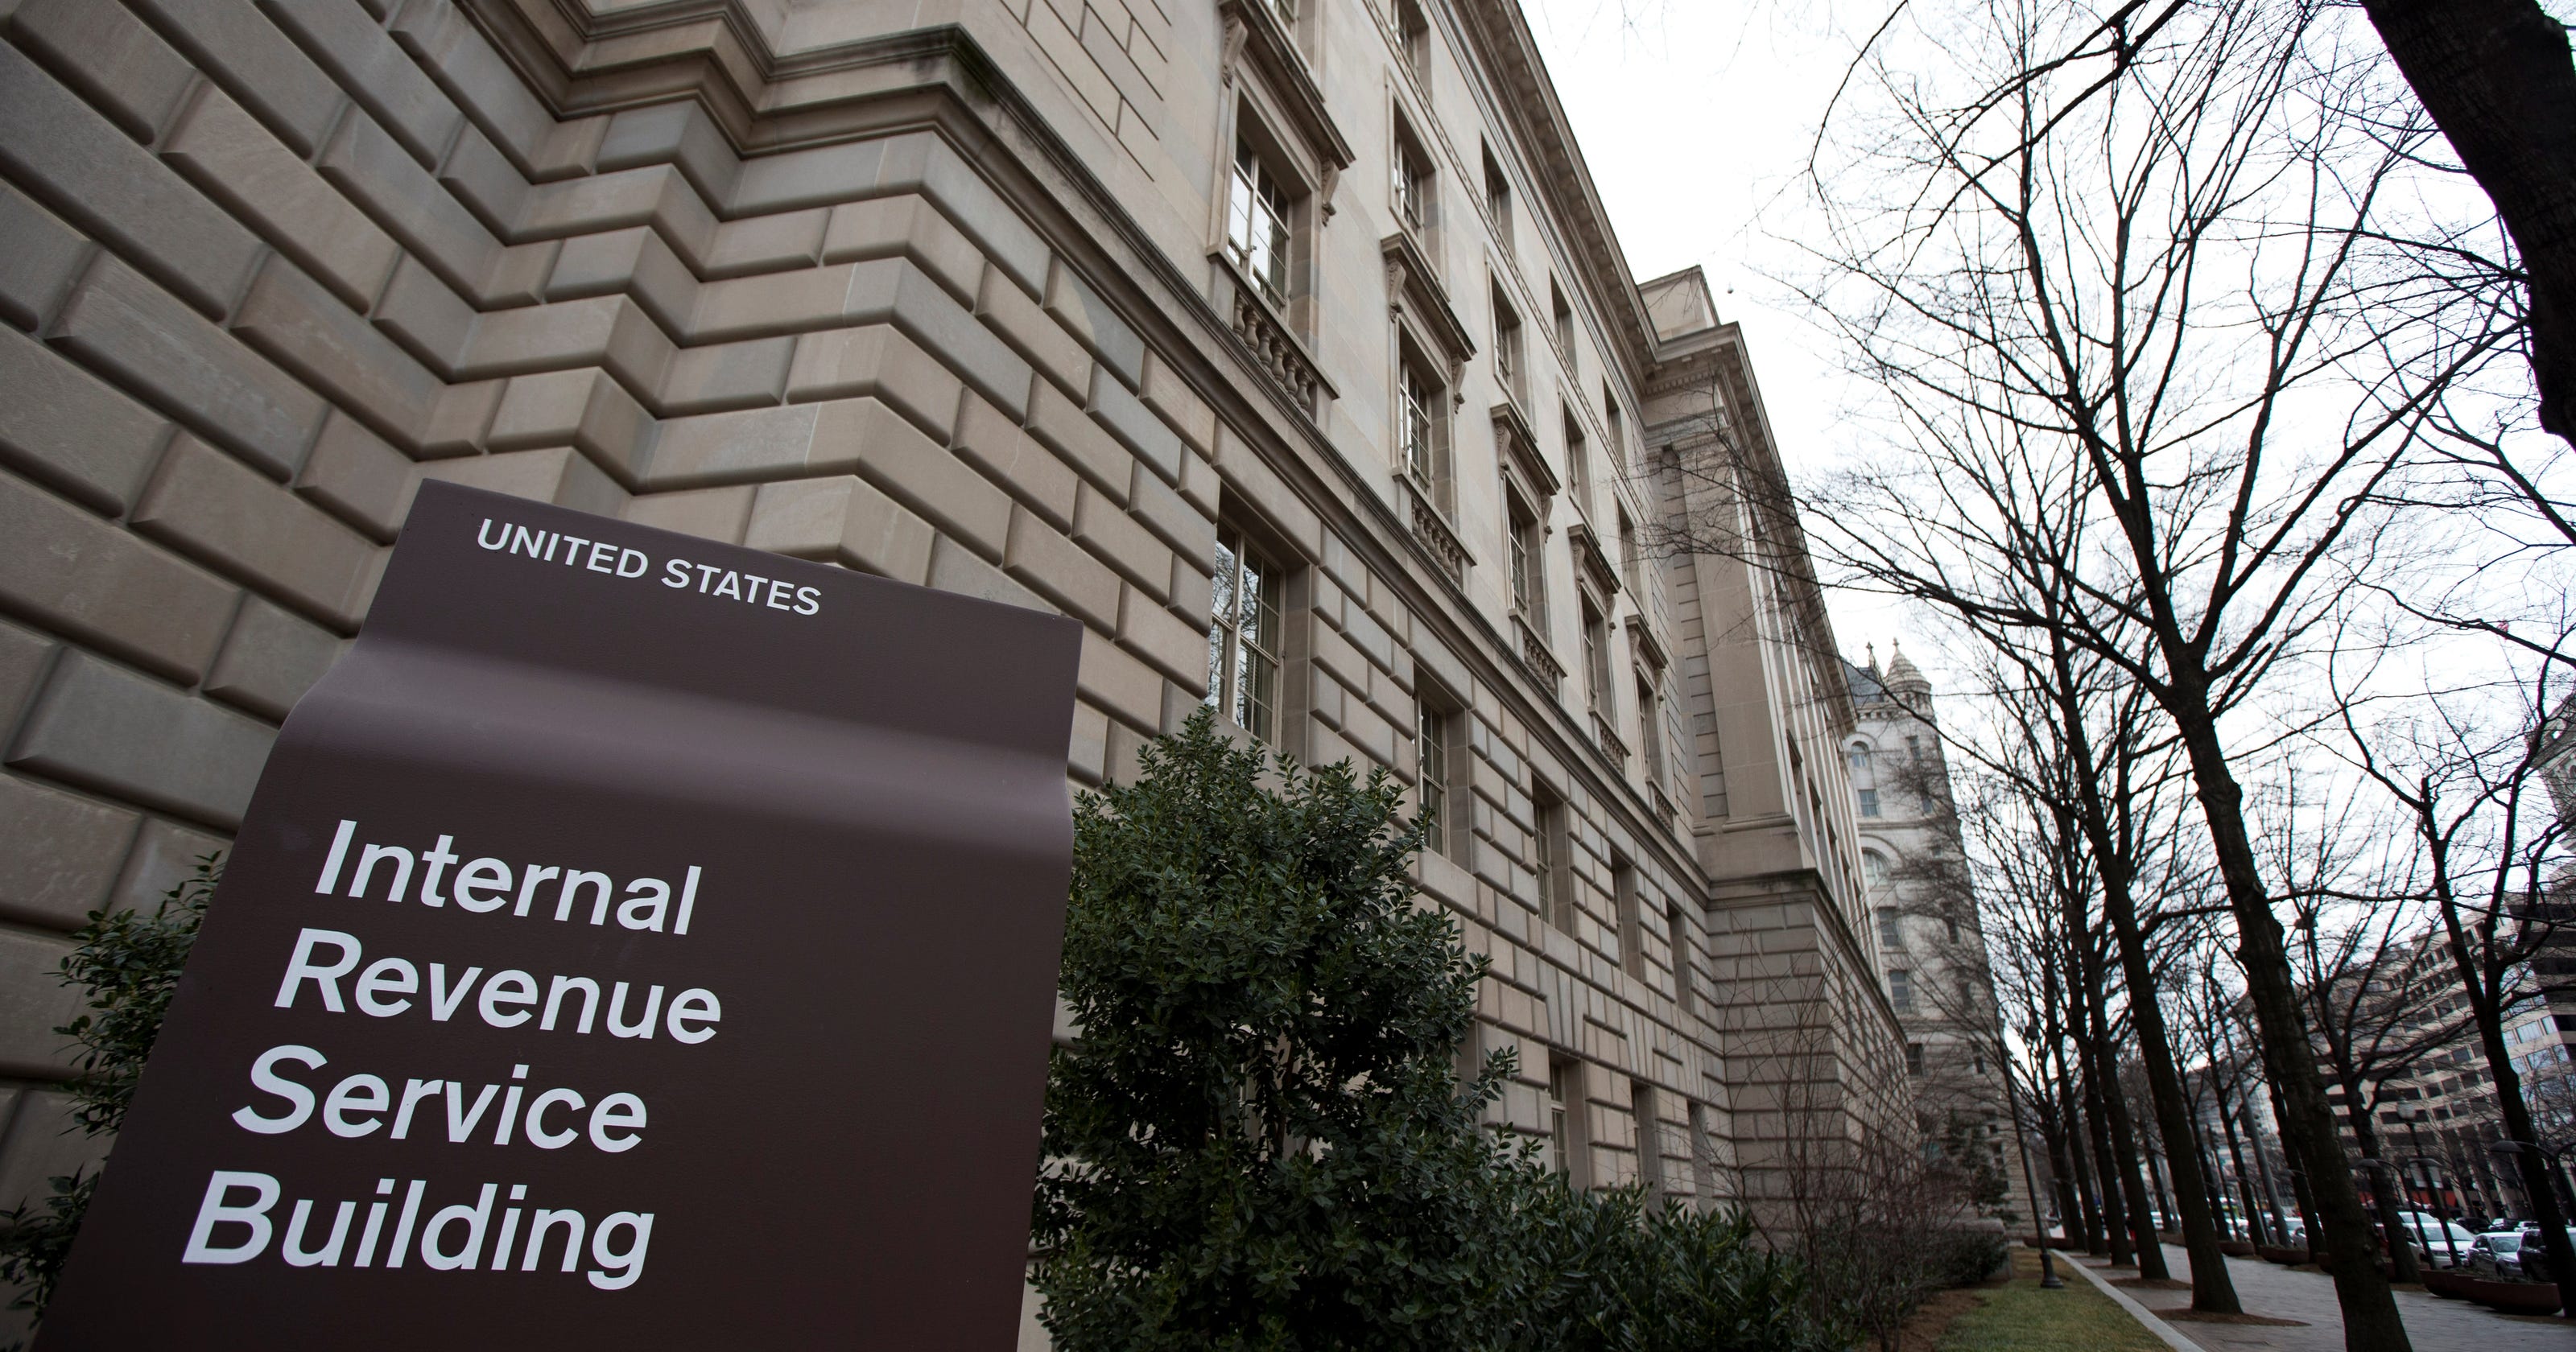 Q&A: The IRS-Tea Party scandal explained3200 x 1680